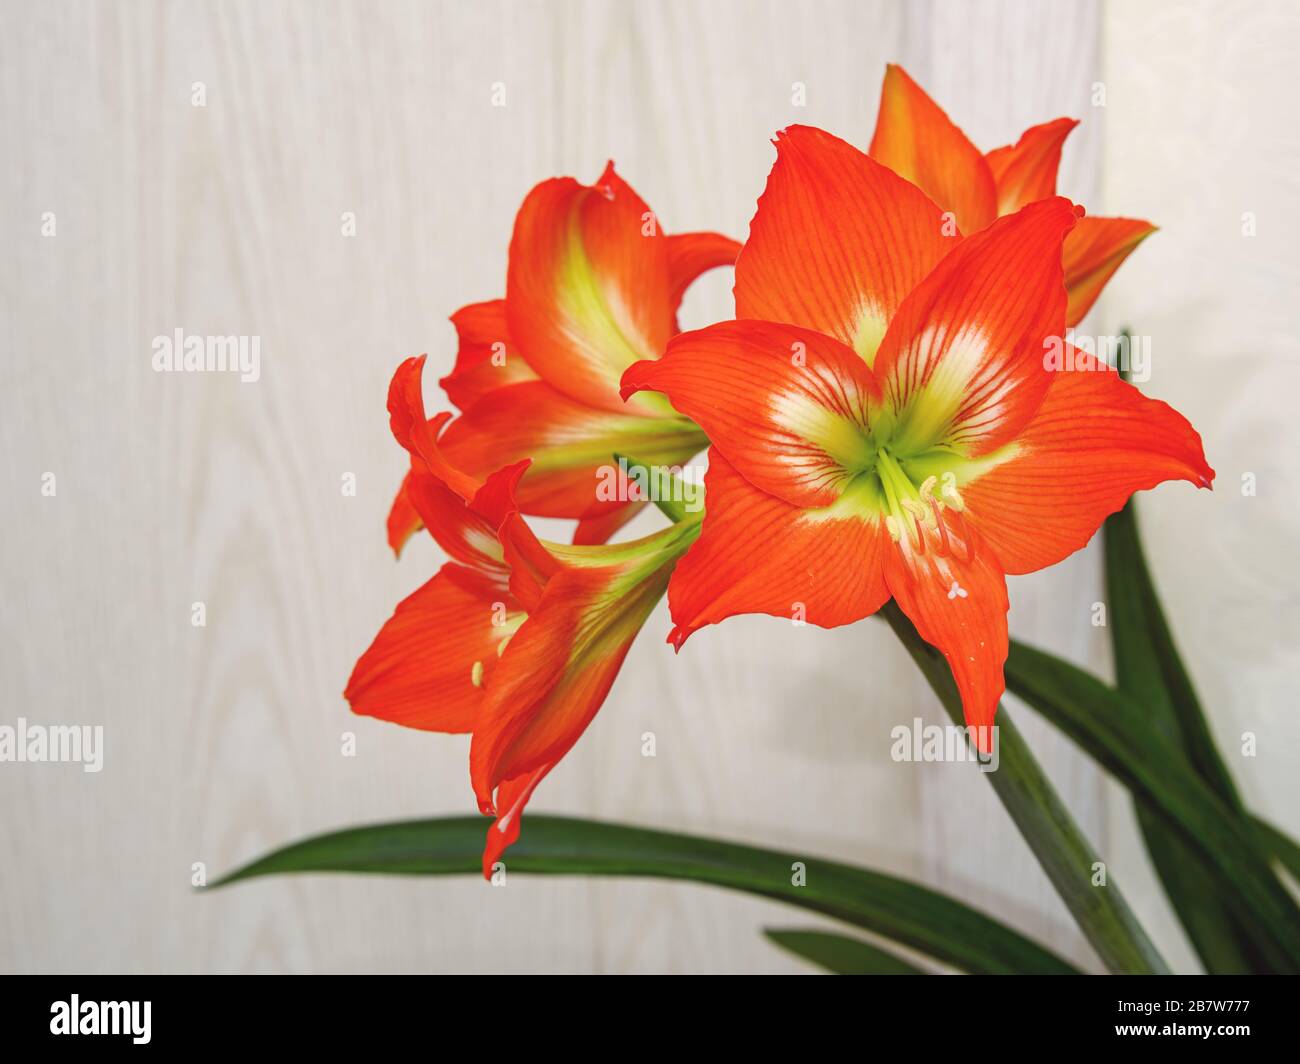 Hippeastrum, bright, red and orange with a white-green core, blossomed in four large flowers on a thick green stem. Stock Photo